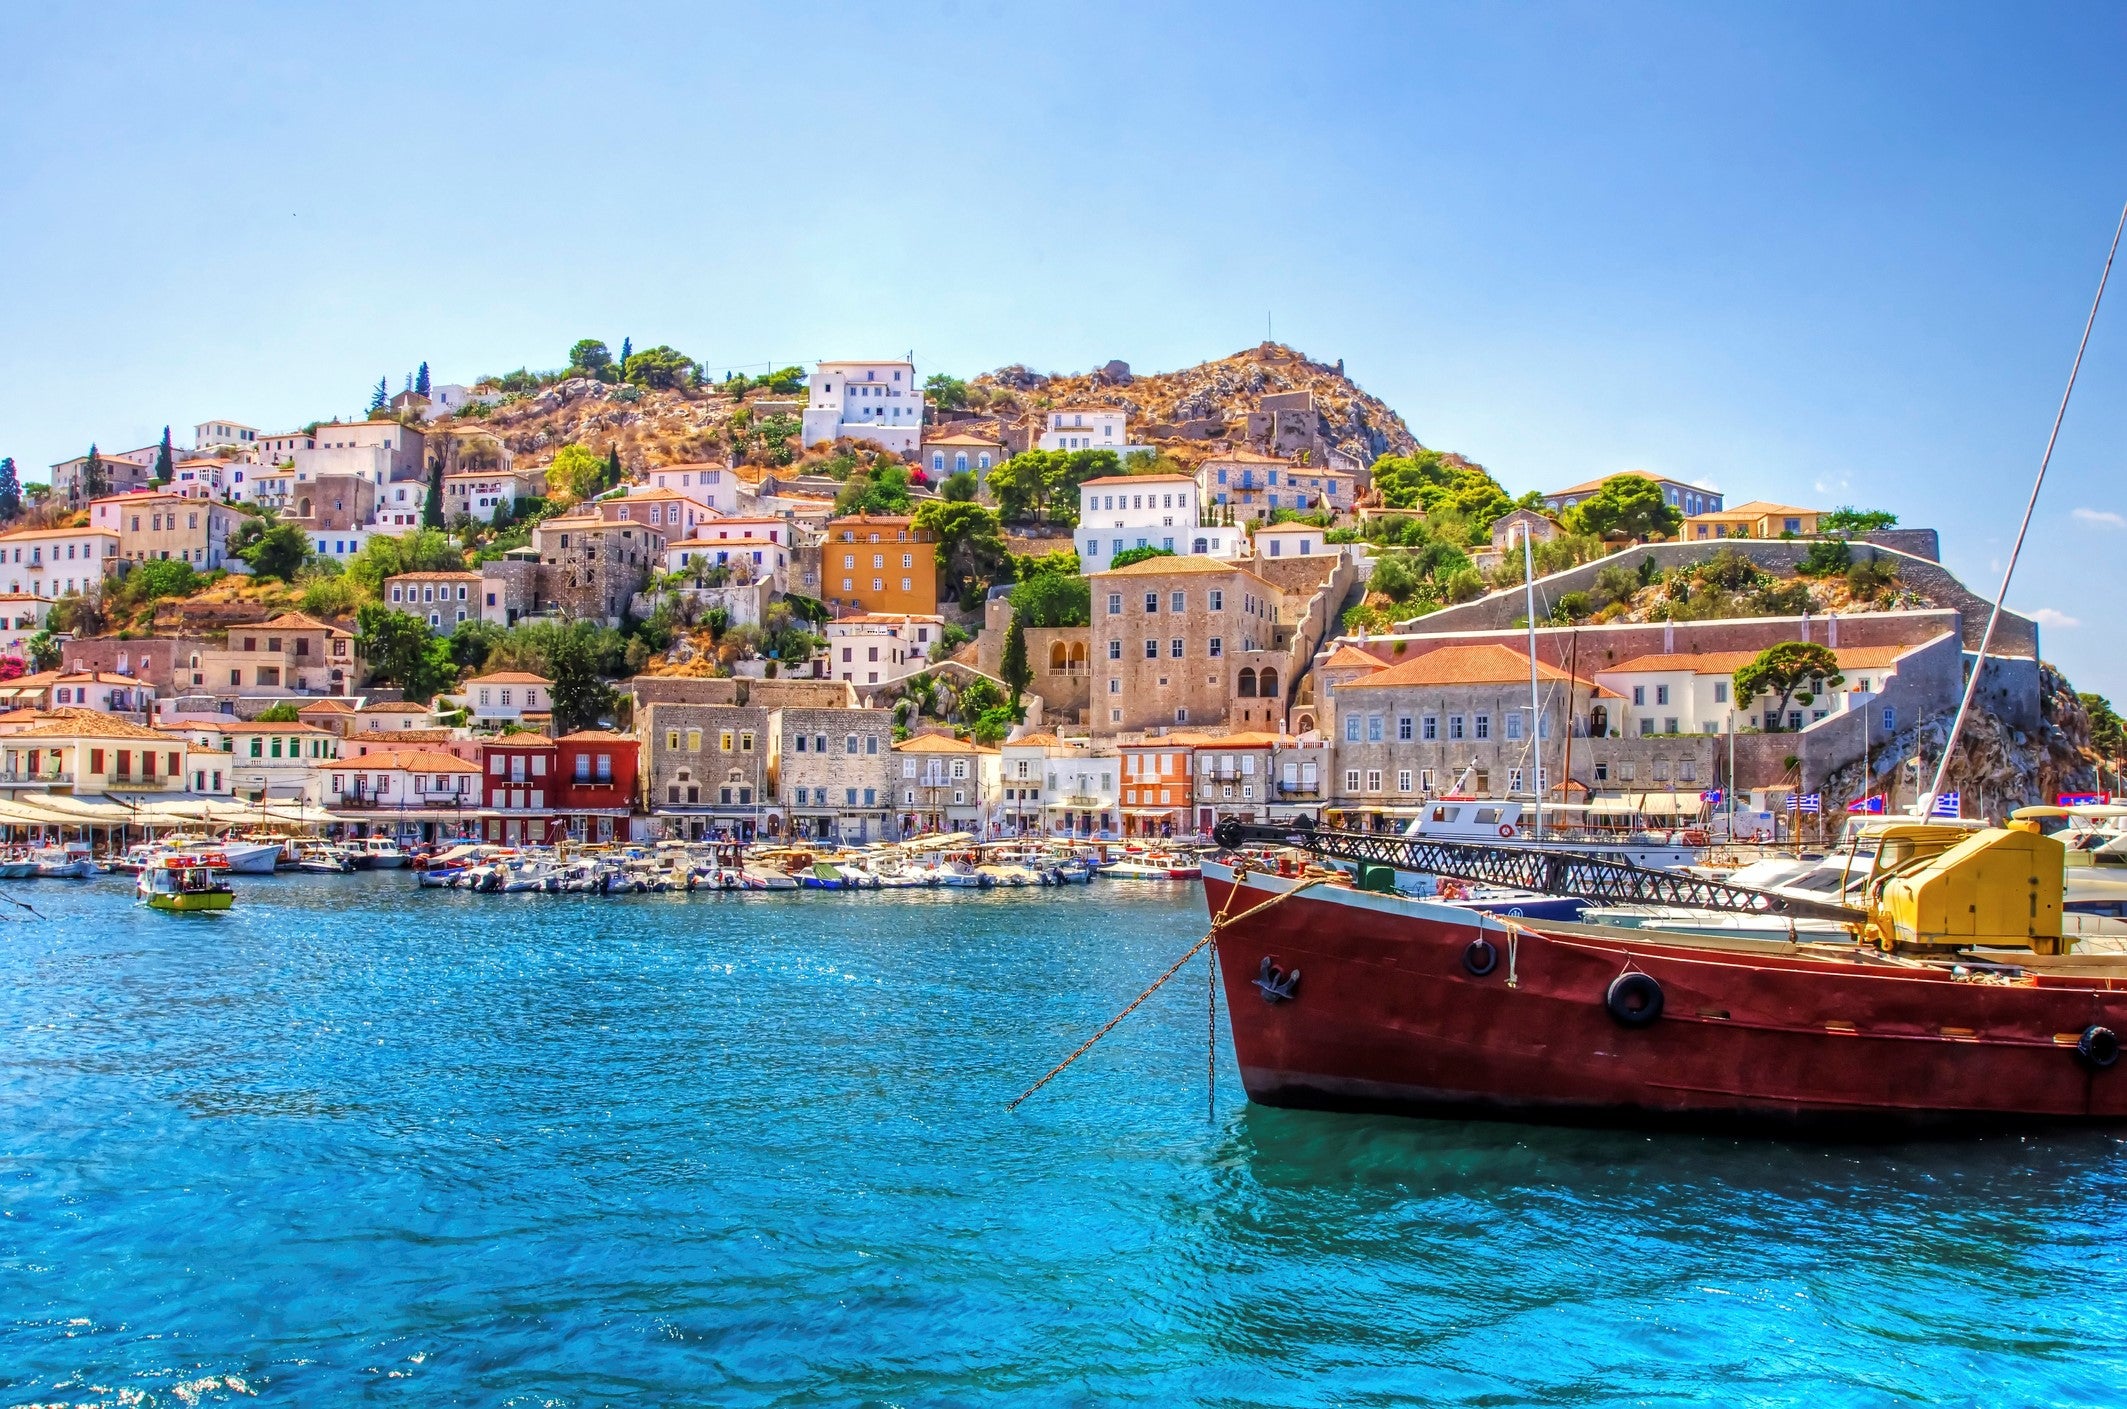 Hydra is a slice of authentic Greece